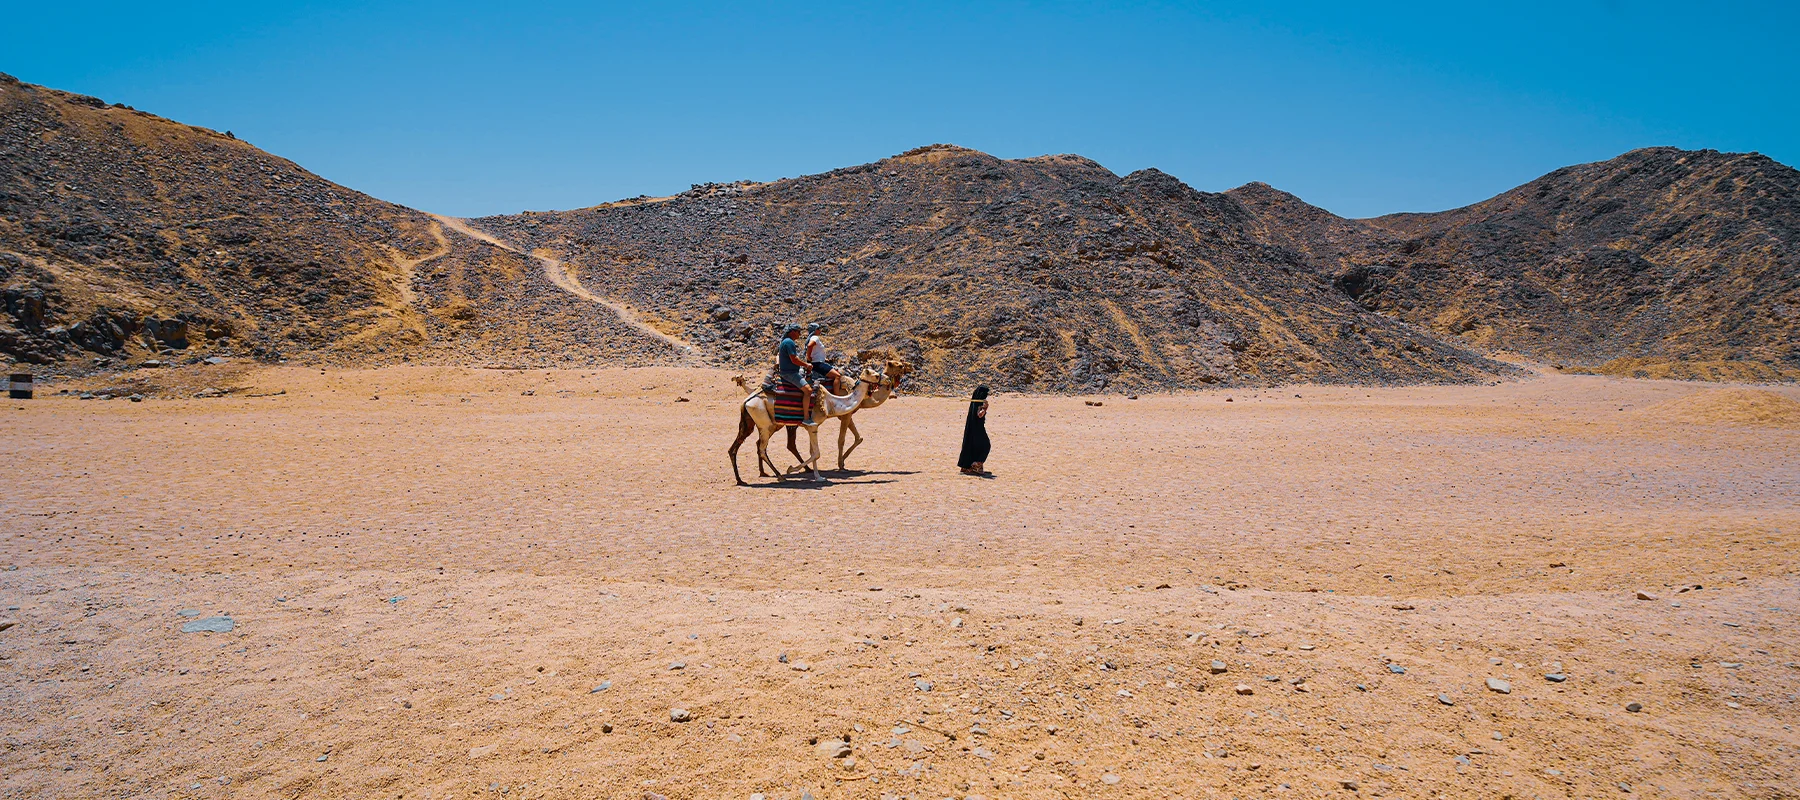 Desert Safari by Moto Quad with Camel Riding in Hurghada by vivaegypttravel.com